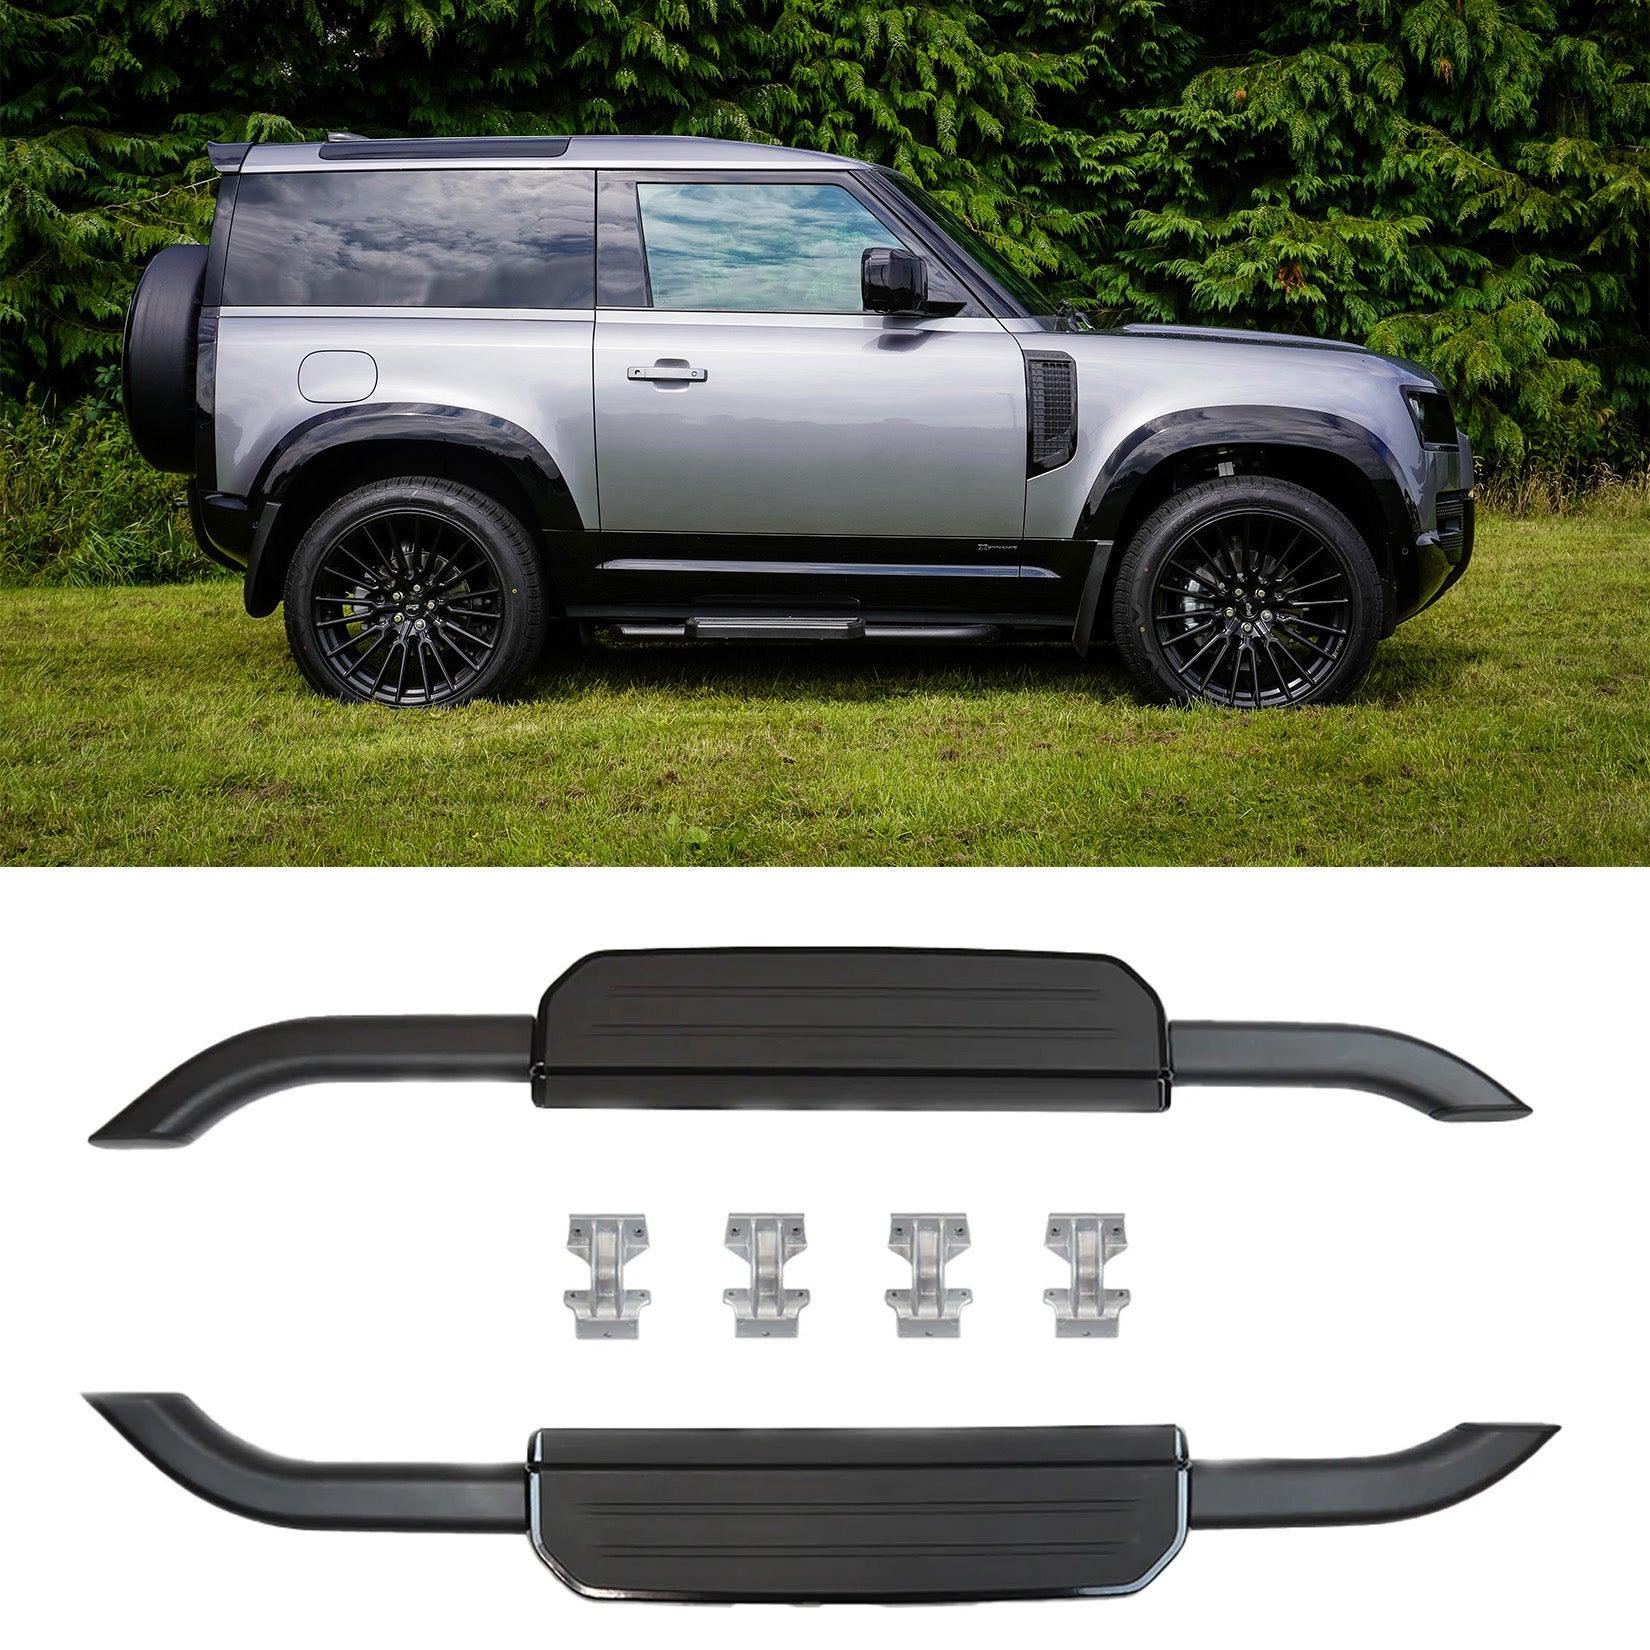 LAND ROVER DEFENDER 90 L663 2020 ON OE STYLE RUNNING BOARDS BLACK – PAIR - RisperStyling